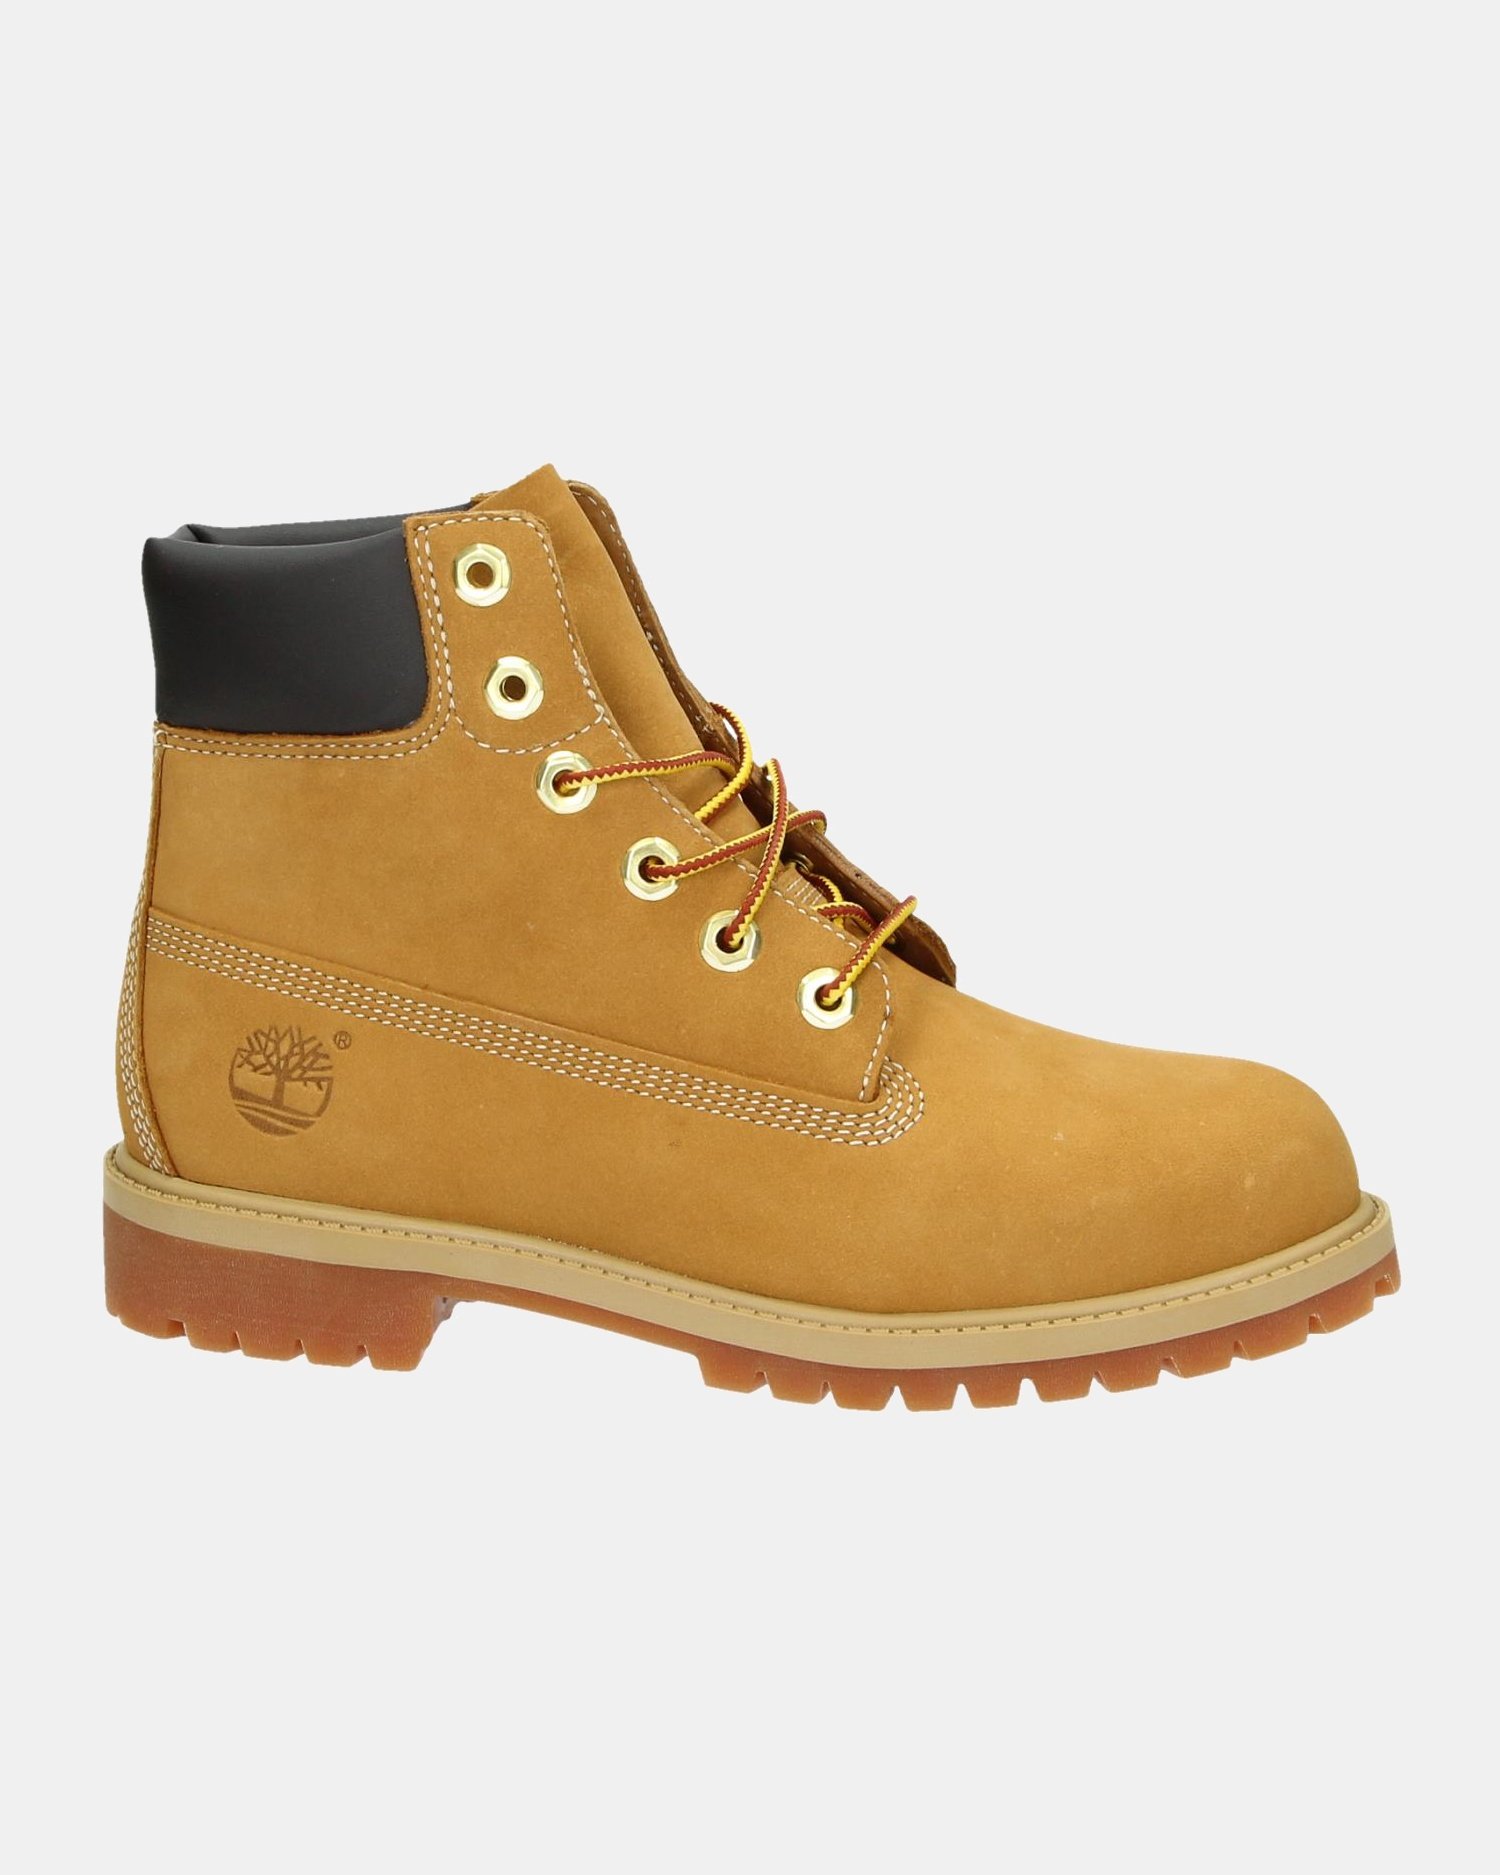 Timberland Courma Kid - Veterboots - Geel Nelson.nl